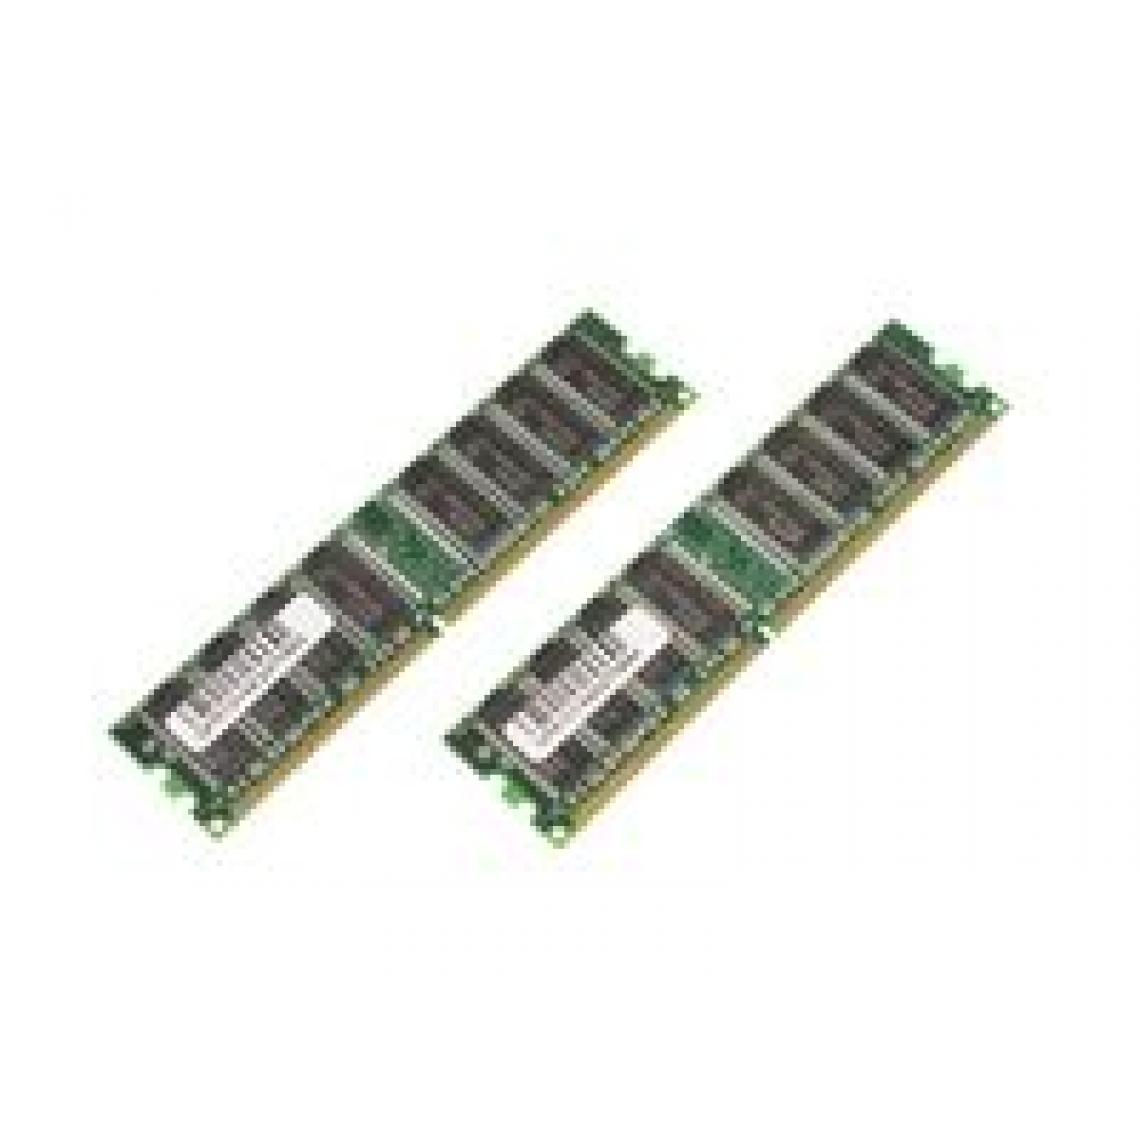 Because Music - 2GB DDR 3200/400 DIMM 64M*8 184PINS 2,6V CL3 kit of 2x 1GB - RAM PC Fixe